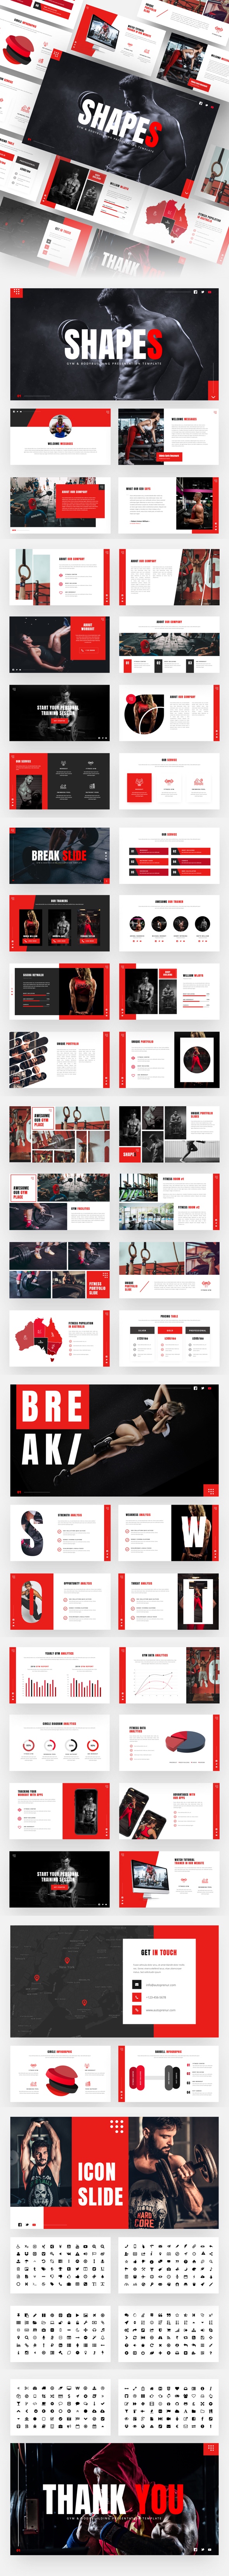 Shapes - Gym & Bodybuilding Powerpoint Template